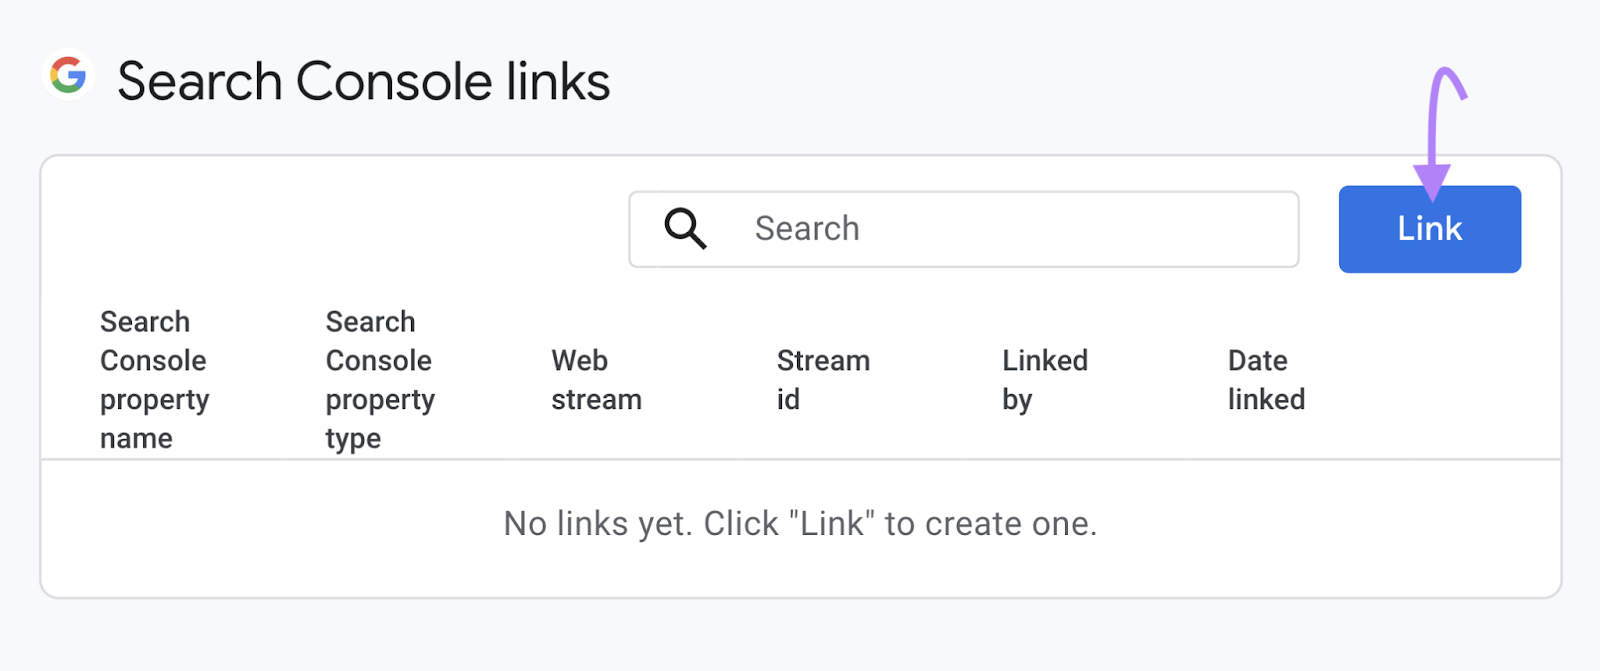 "Link" button highlighted in the "Search Console links" section